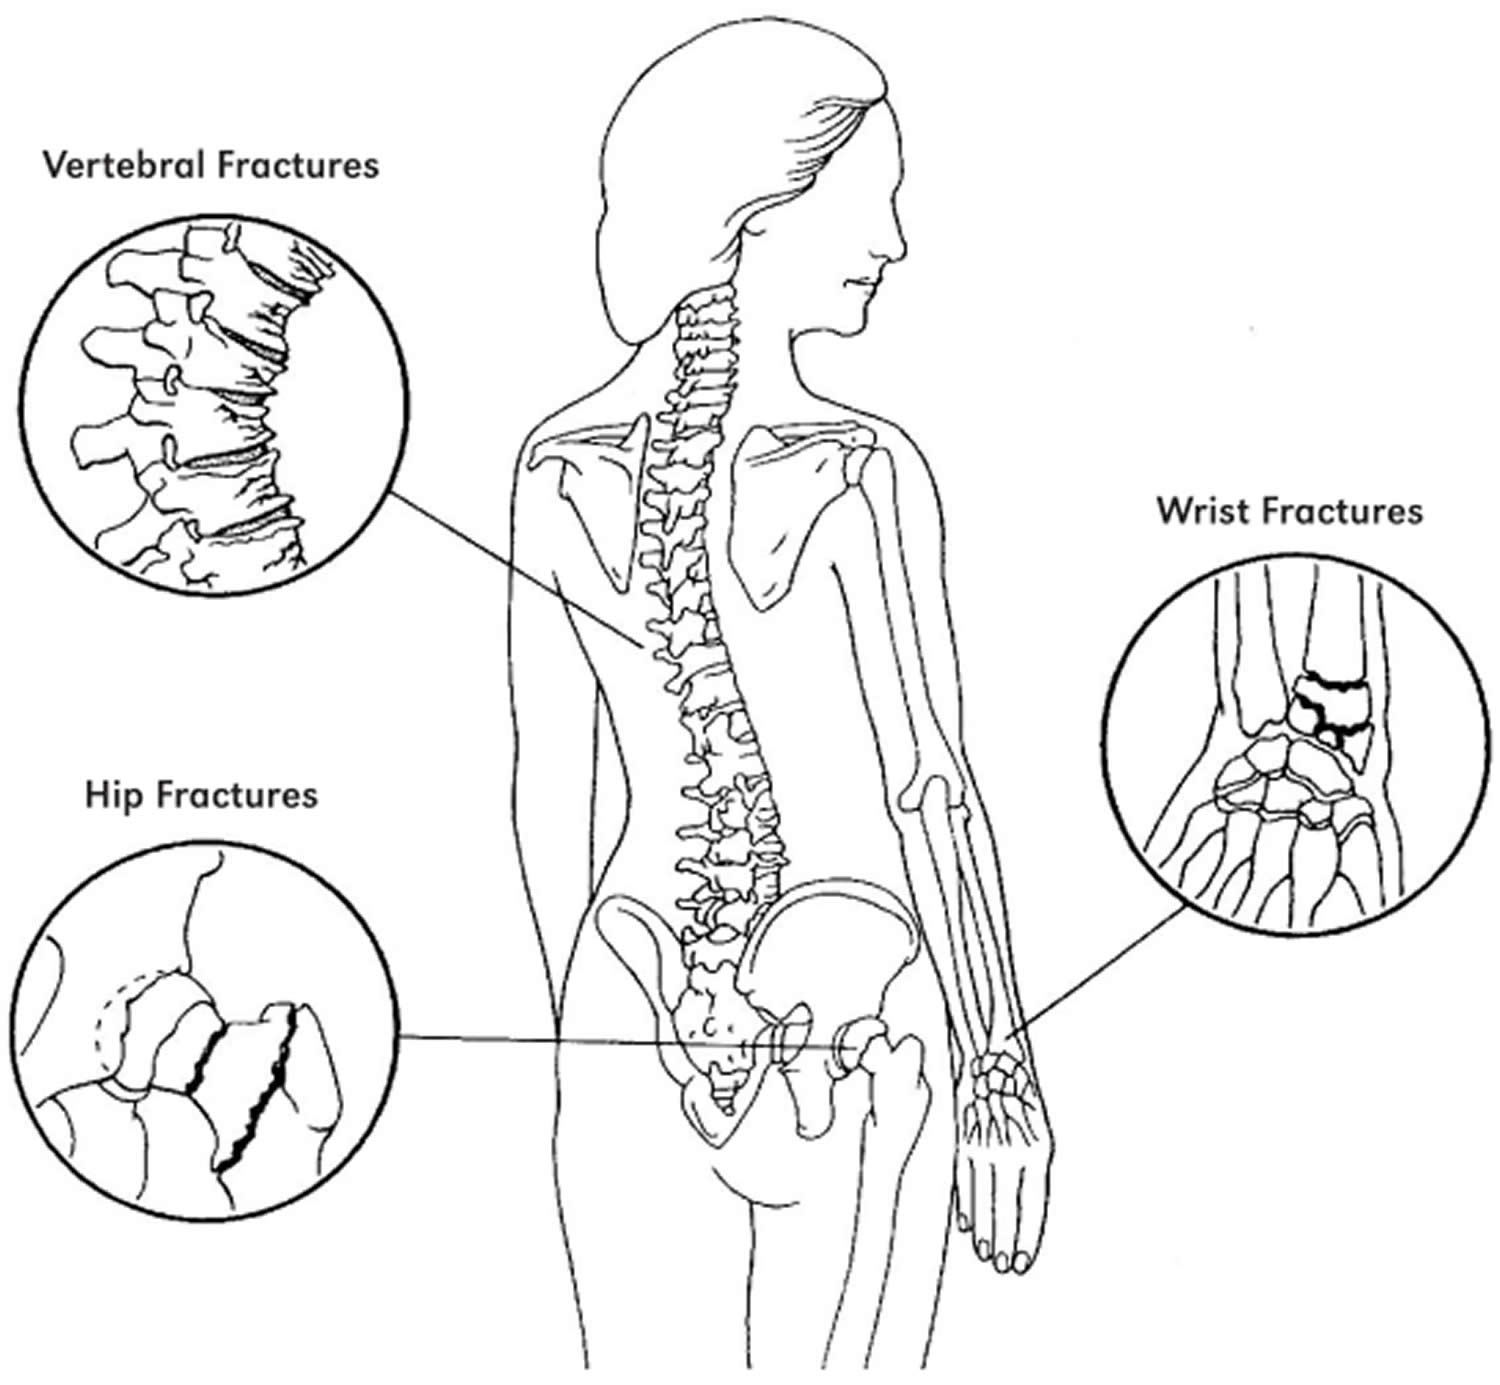 Common bone Fracture areas in osteoporosis